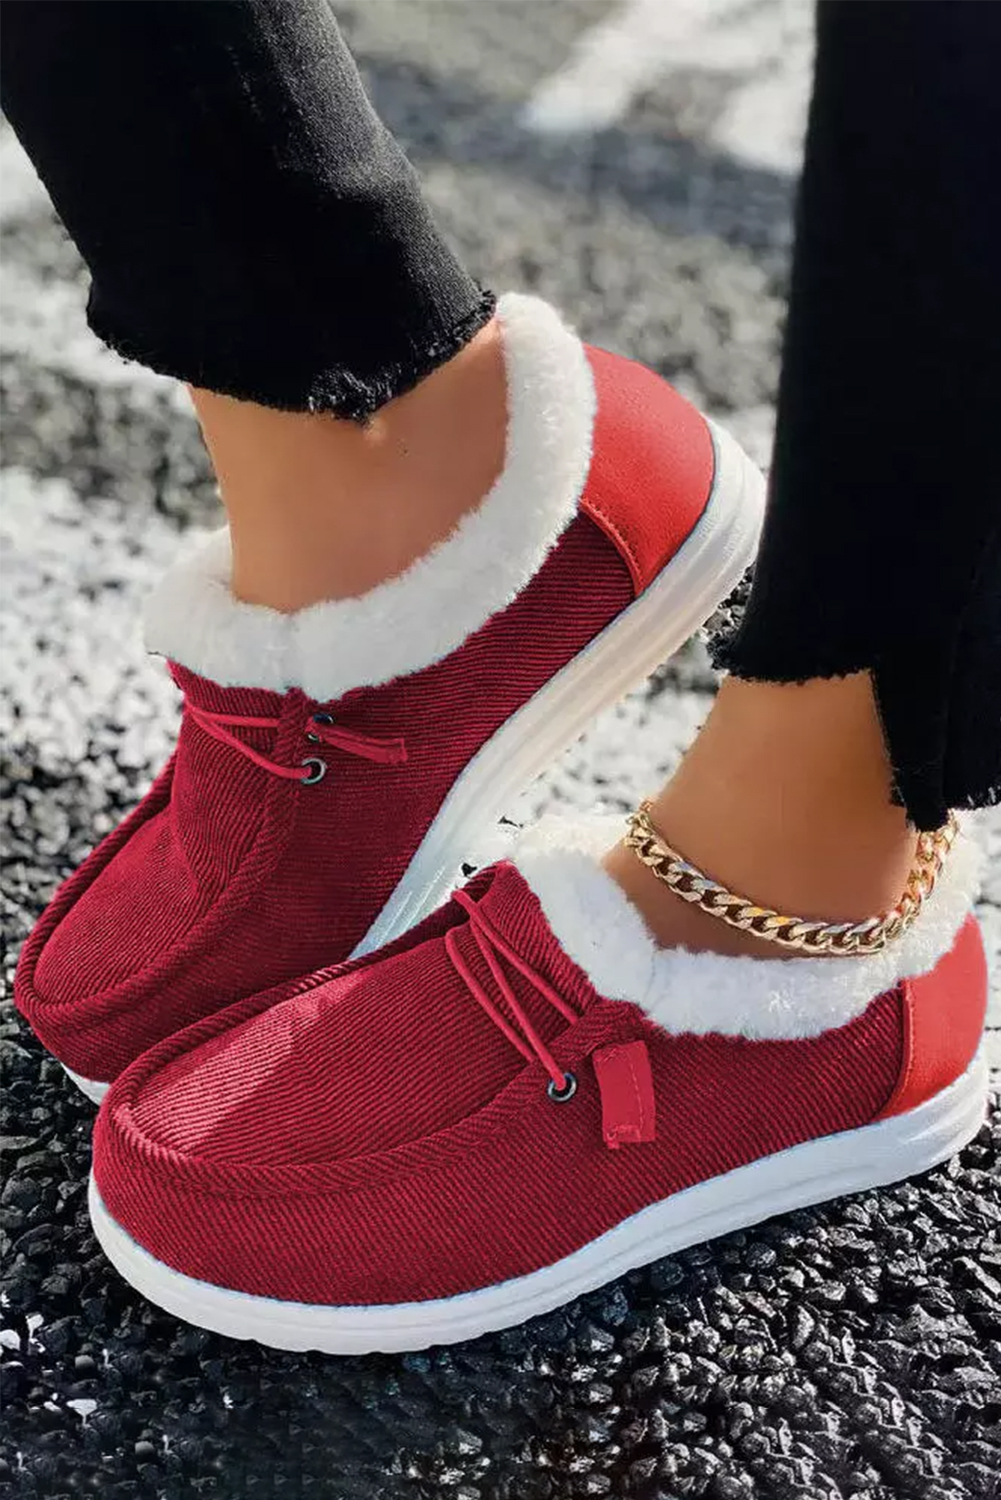 Wholesale&Dropship Fiery Red Lace Up Corduroy Fur Lined Sneakers